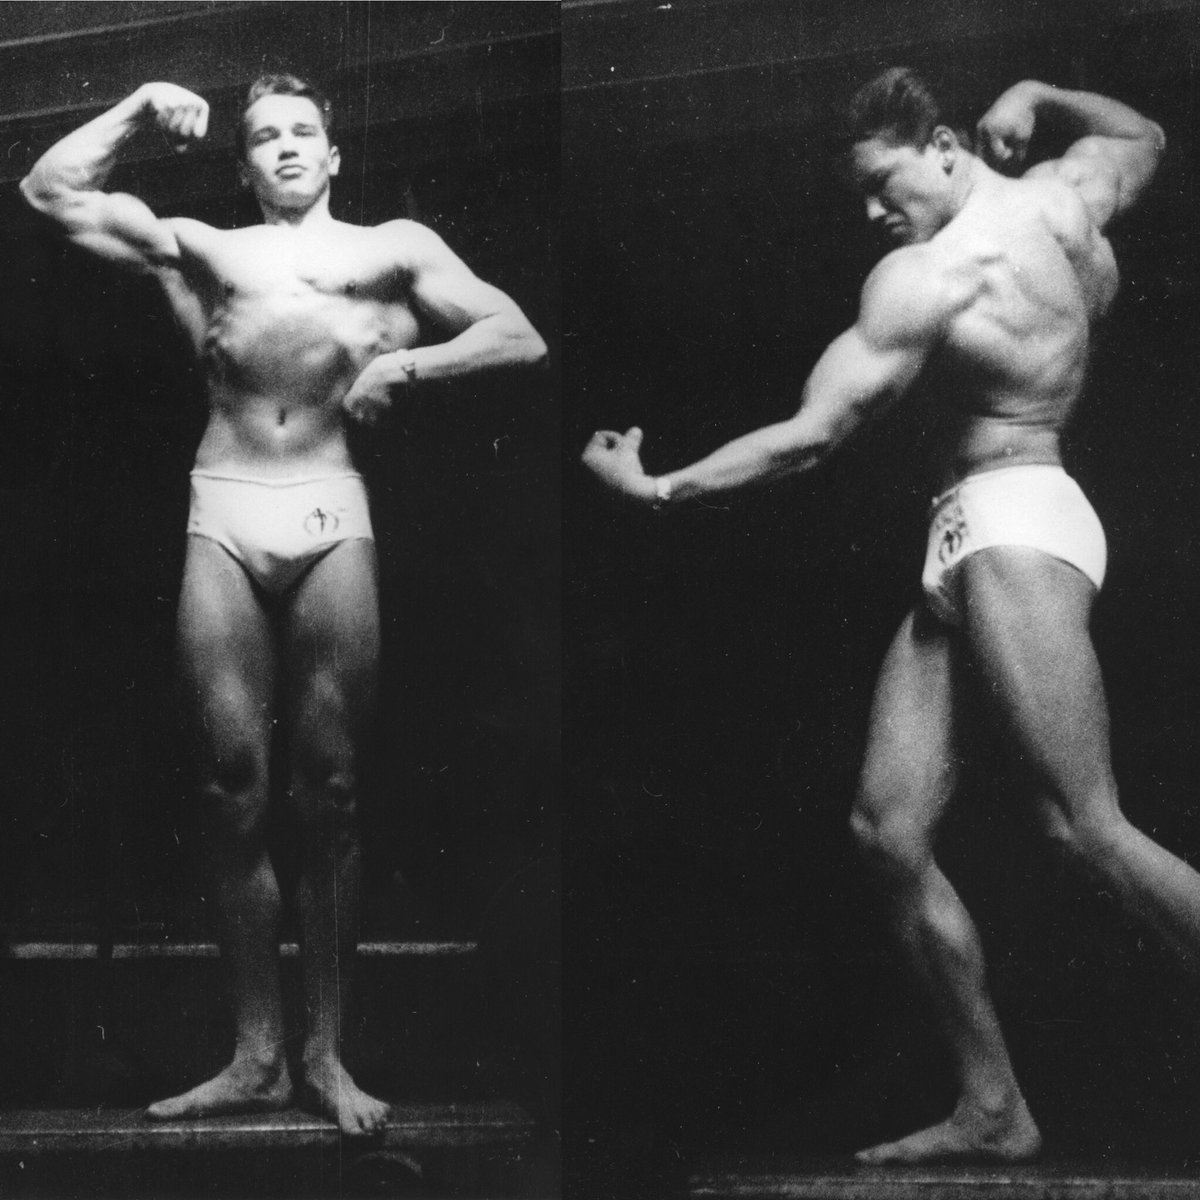 #tbt to when I was 16, before I ever competed. https://t.co/Ozb17lZS8q